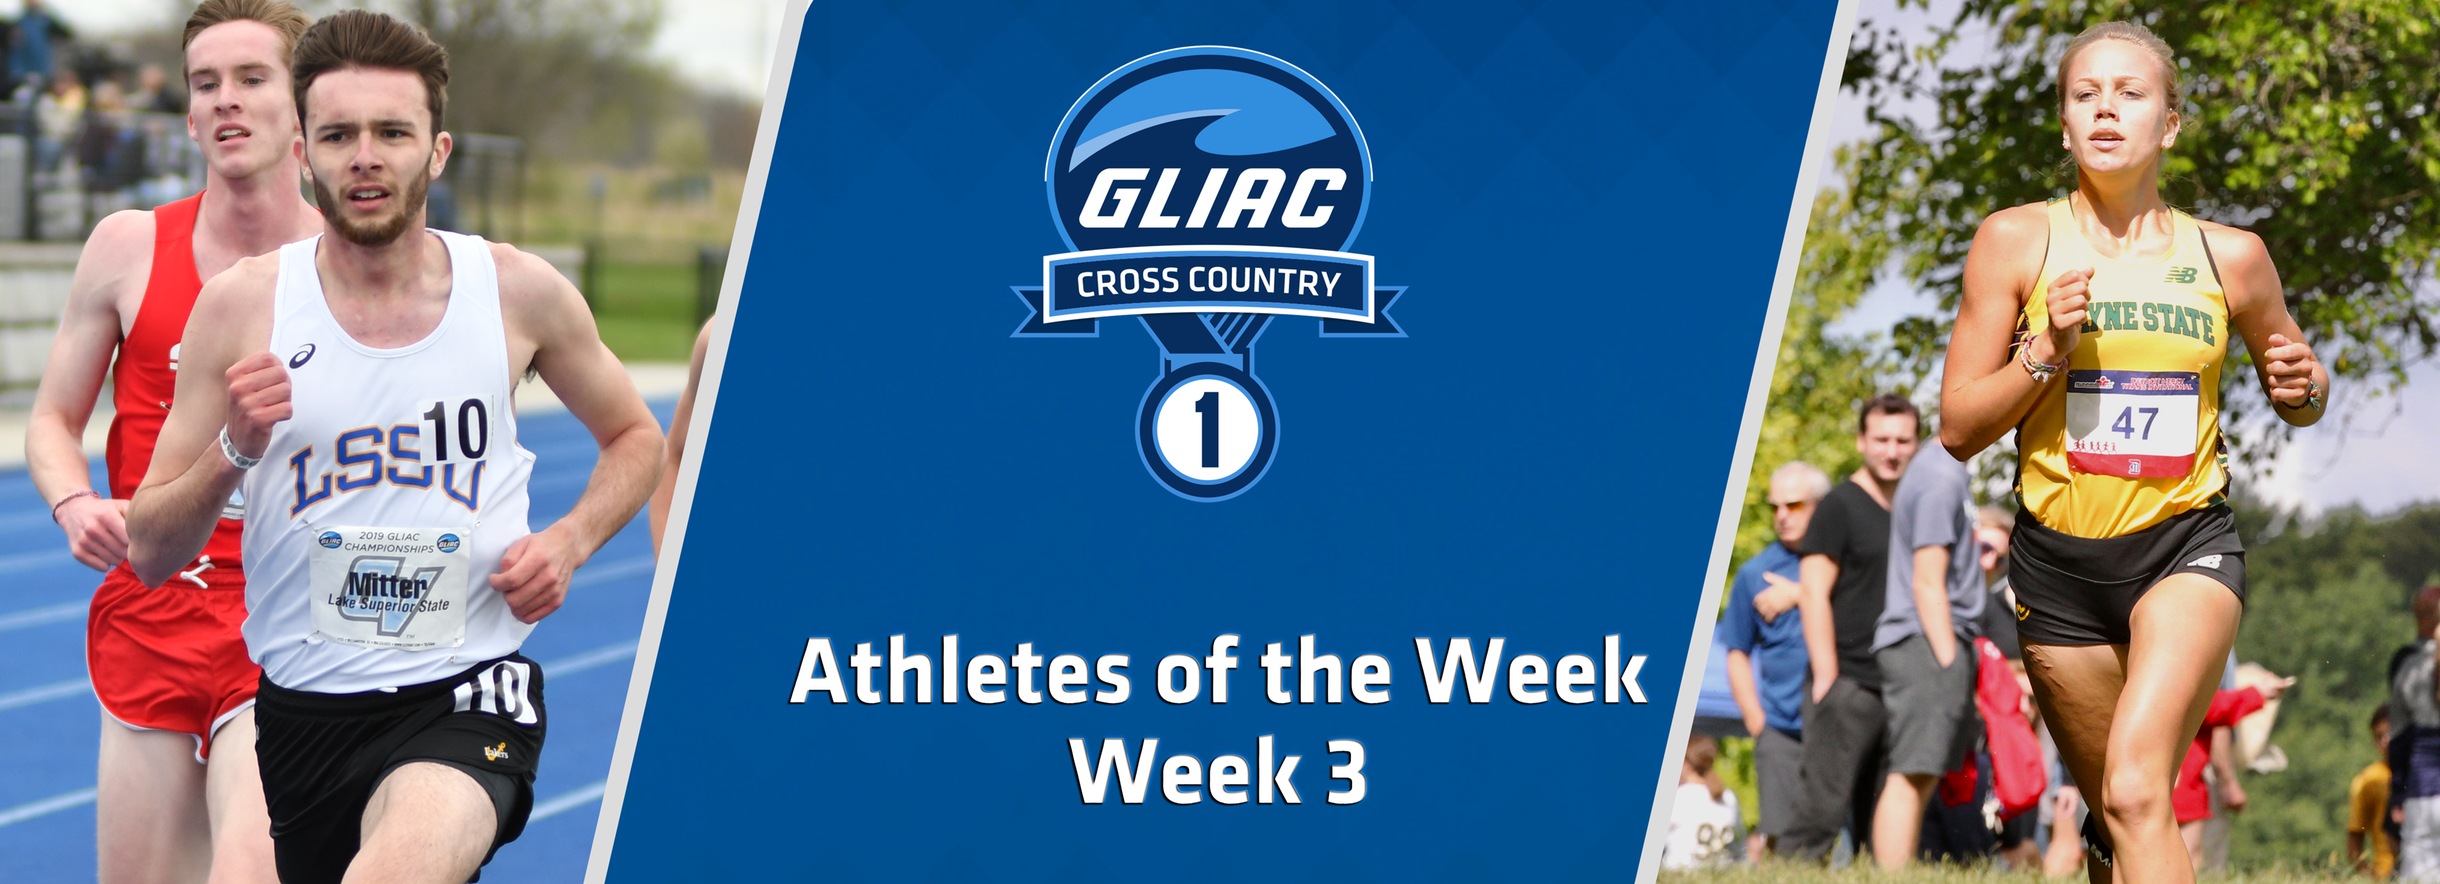 WSU's Defrain and LSSU's Mitter Earn GLIAC Cross Country Athlete of the Week Accolades